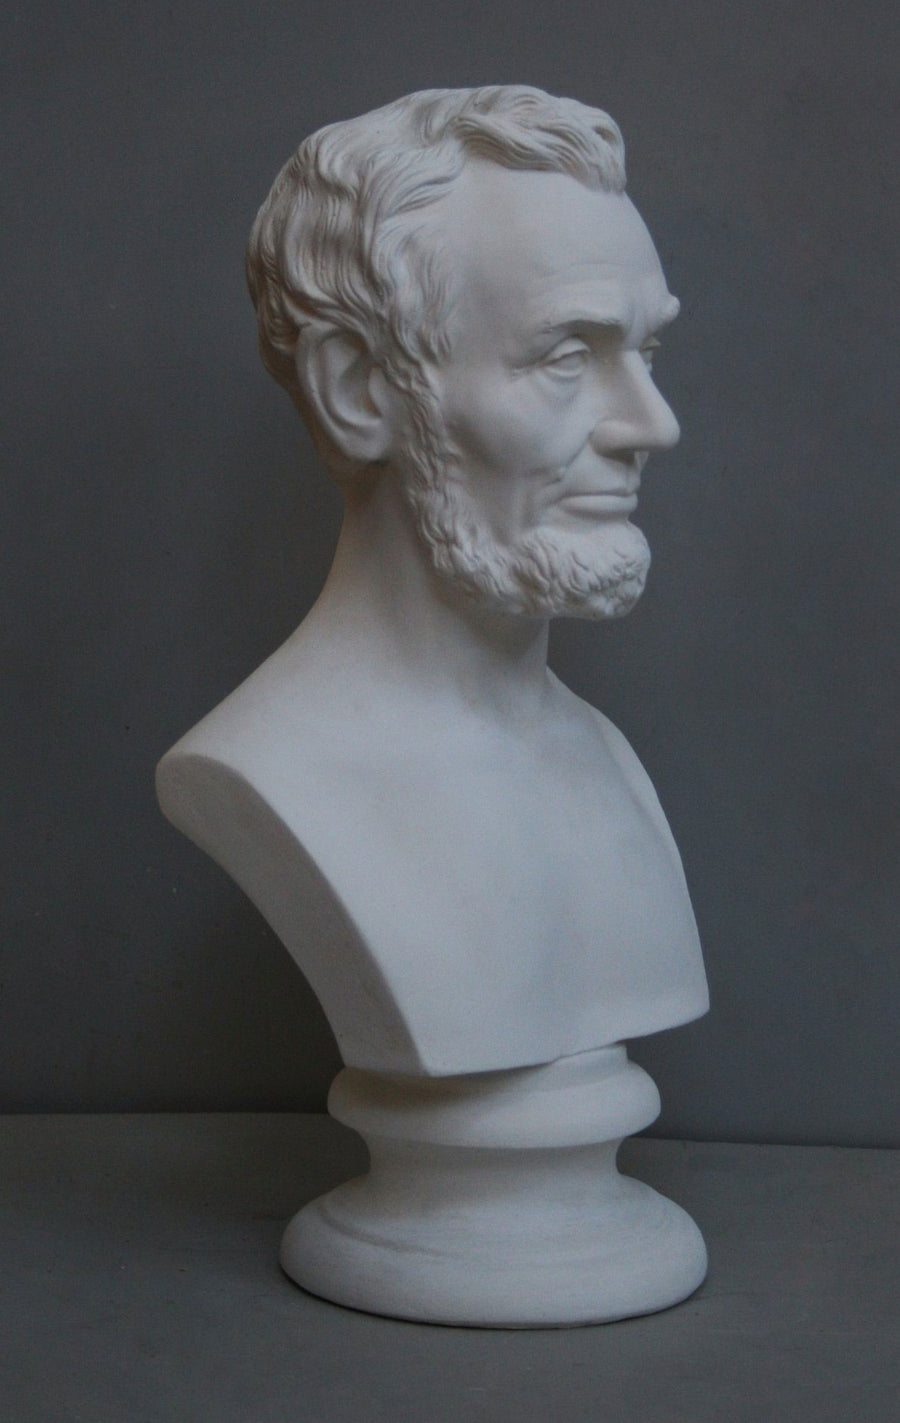 photo with gray background of plaster cast bust sculpture of man with beard, namely Lincoln